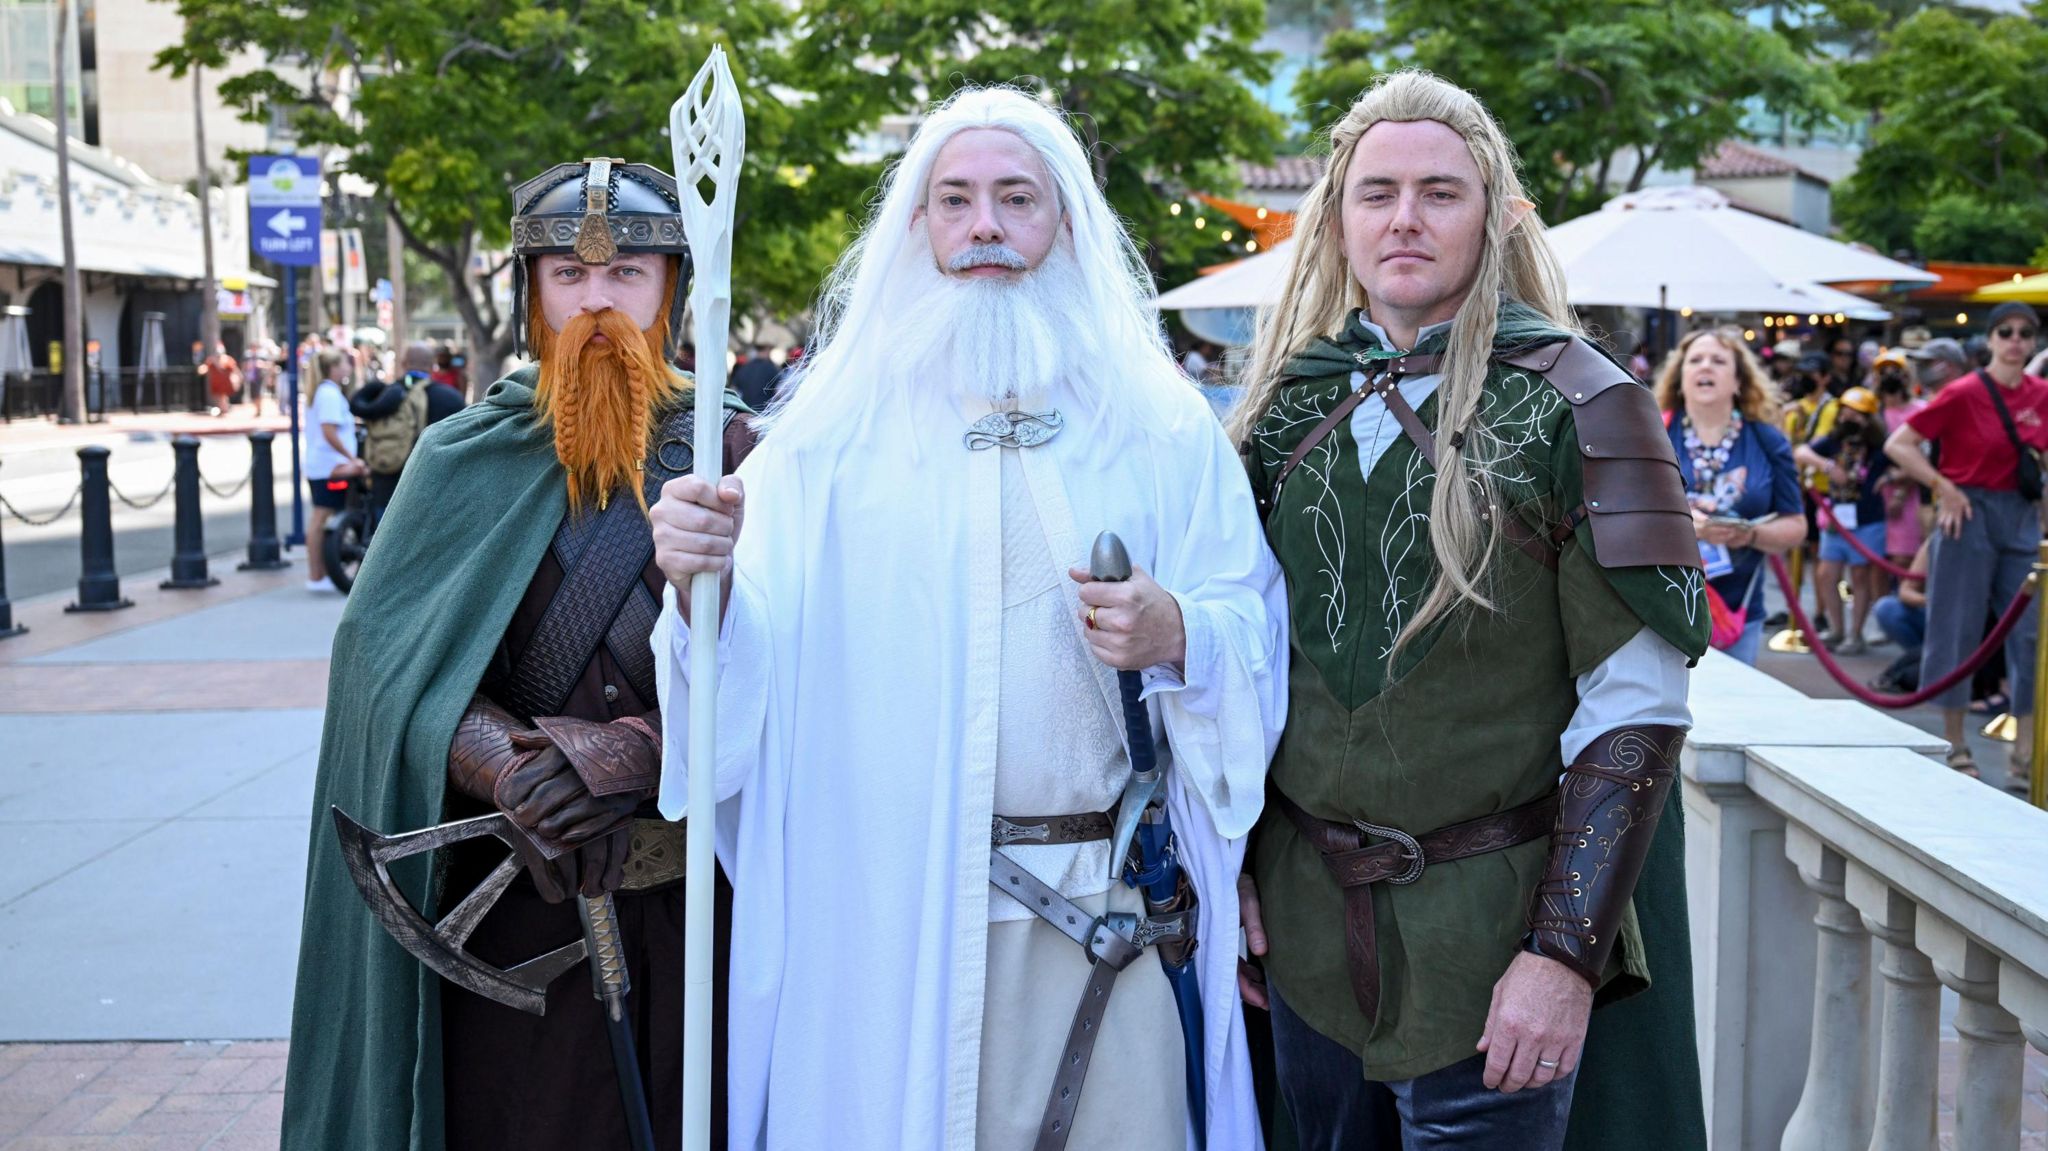 Cosplayers dressed as Gimli, Gandalf and Legolas from Lord of the Rings